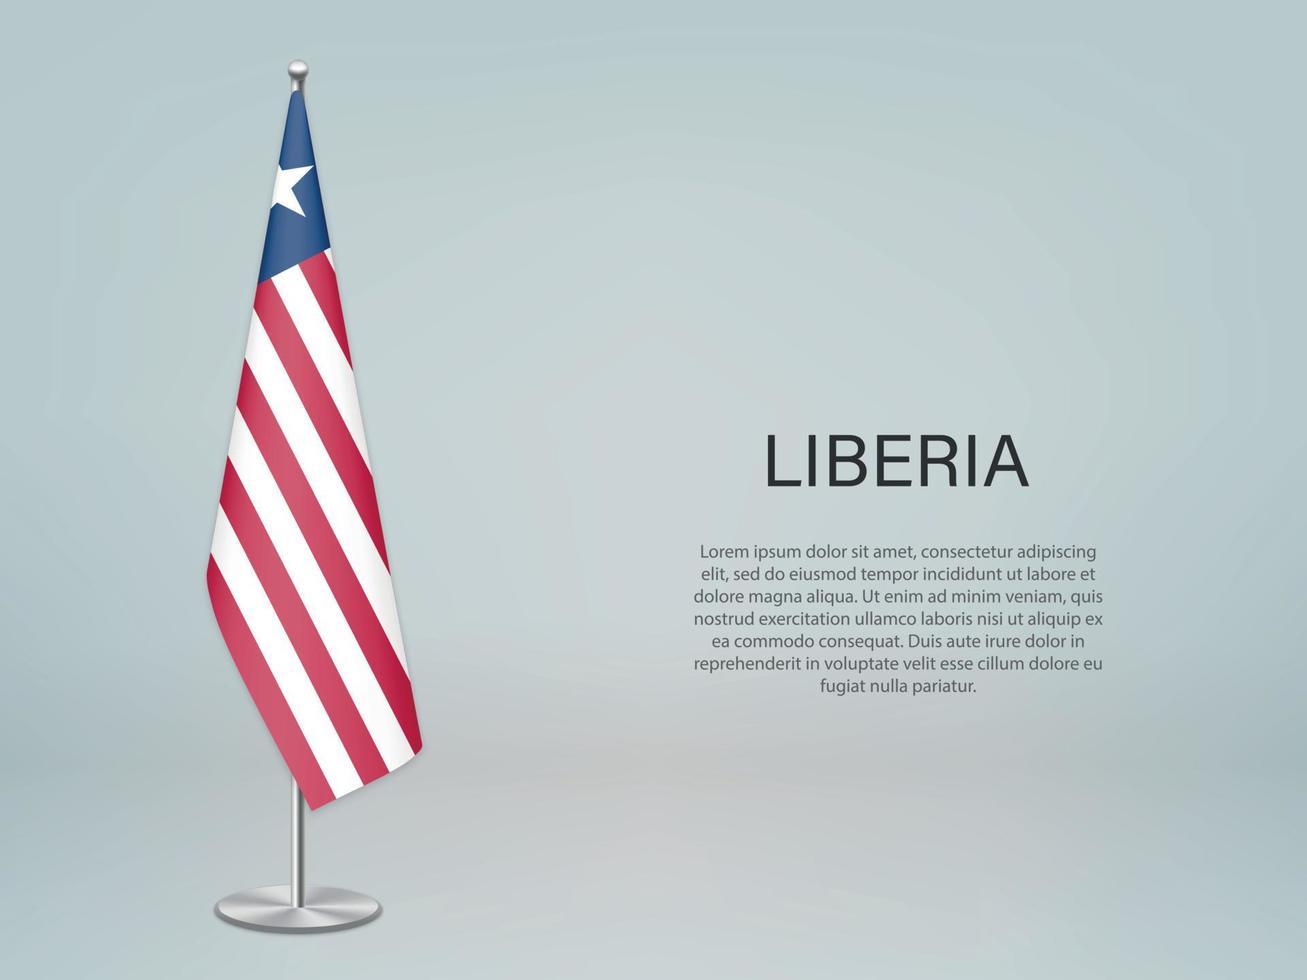 Liberia hanging flag on stand. Template forconference banner vector